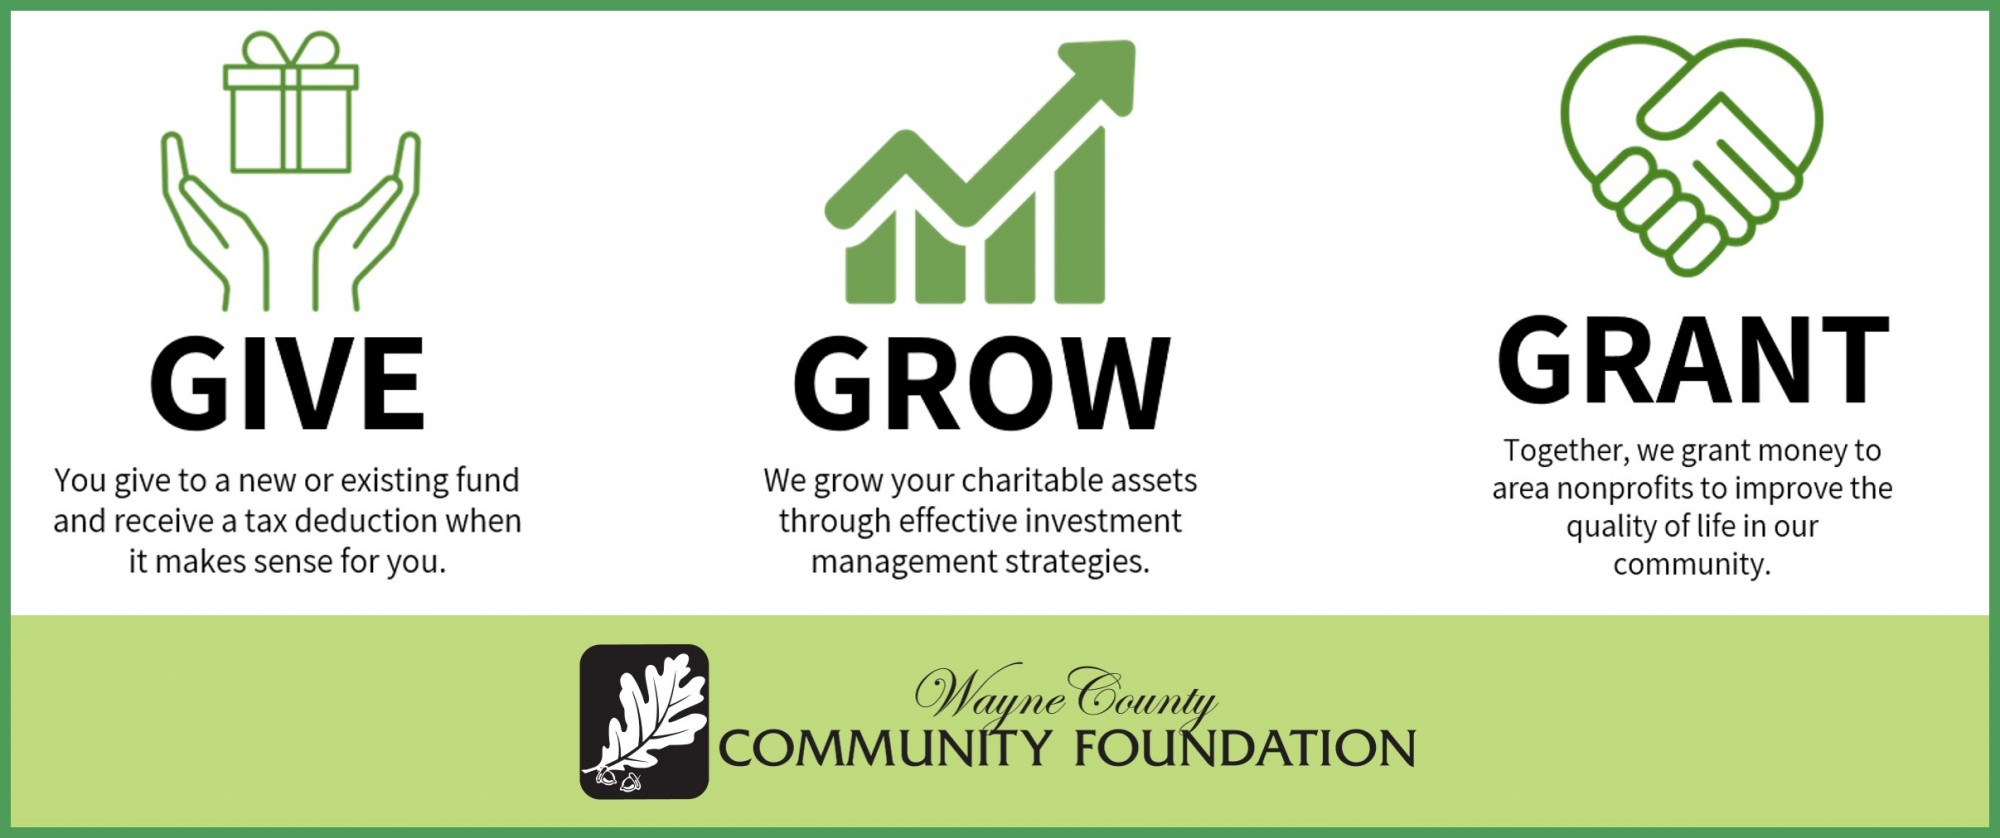 Give Grow Grant